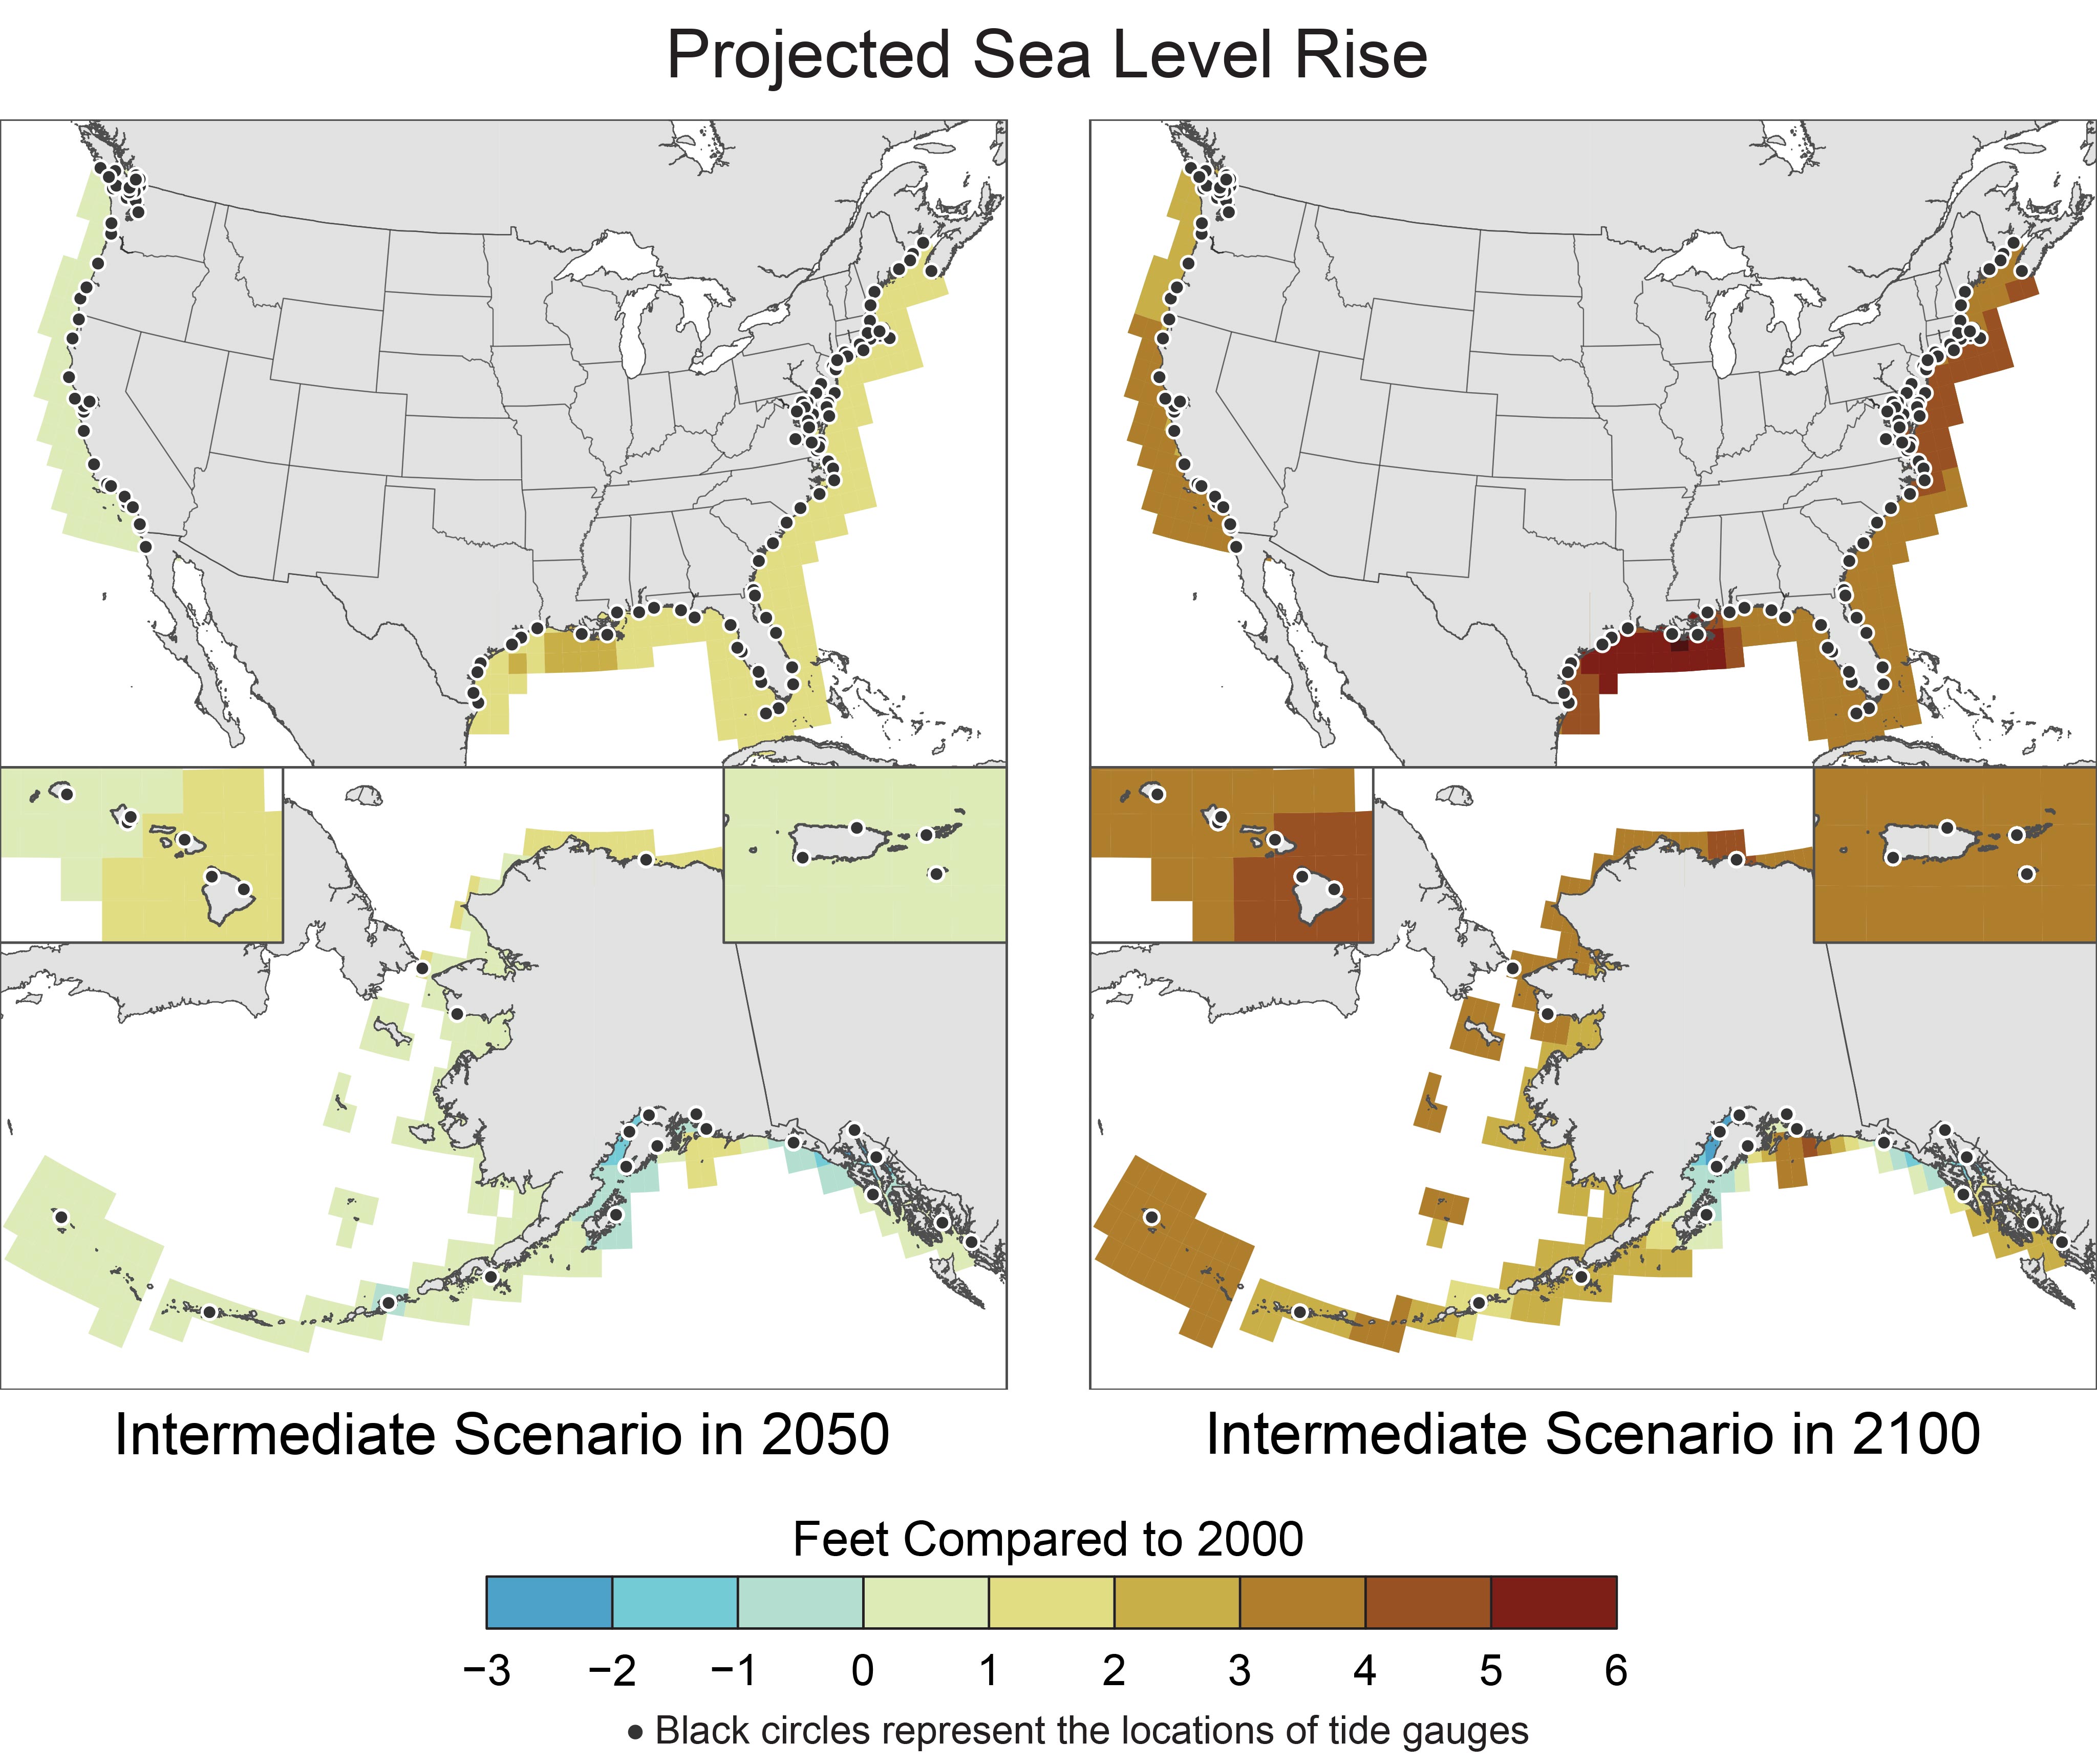 Projected Sea Level Rise